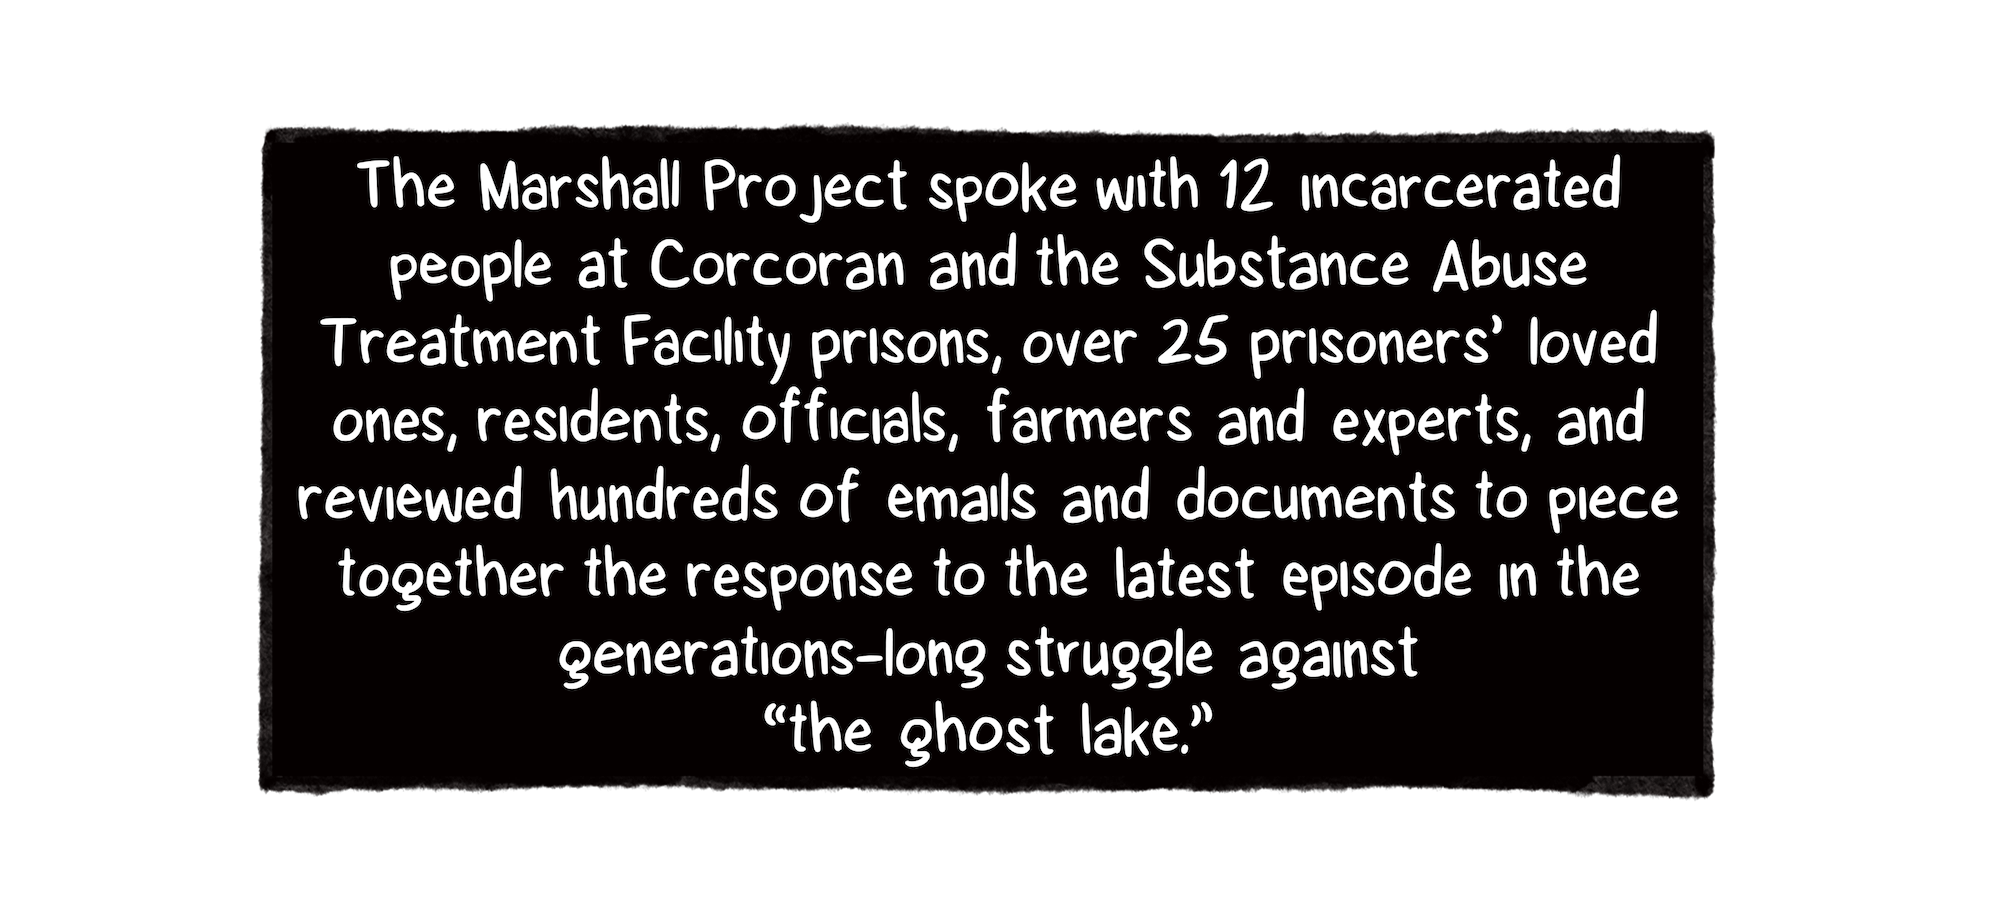 A black-colored box details that The Marshall Project spoke with a dozen incarcerated people and dozens of prisoners’ loved ones, residents, officials, farmers and experts as well as reviewed emails and state documents to report this story.